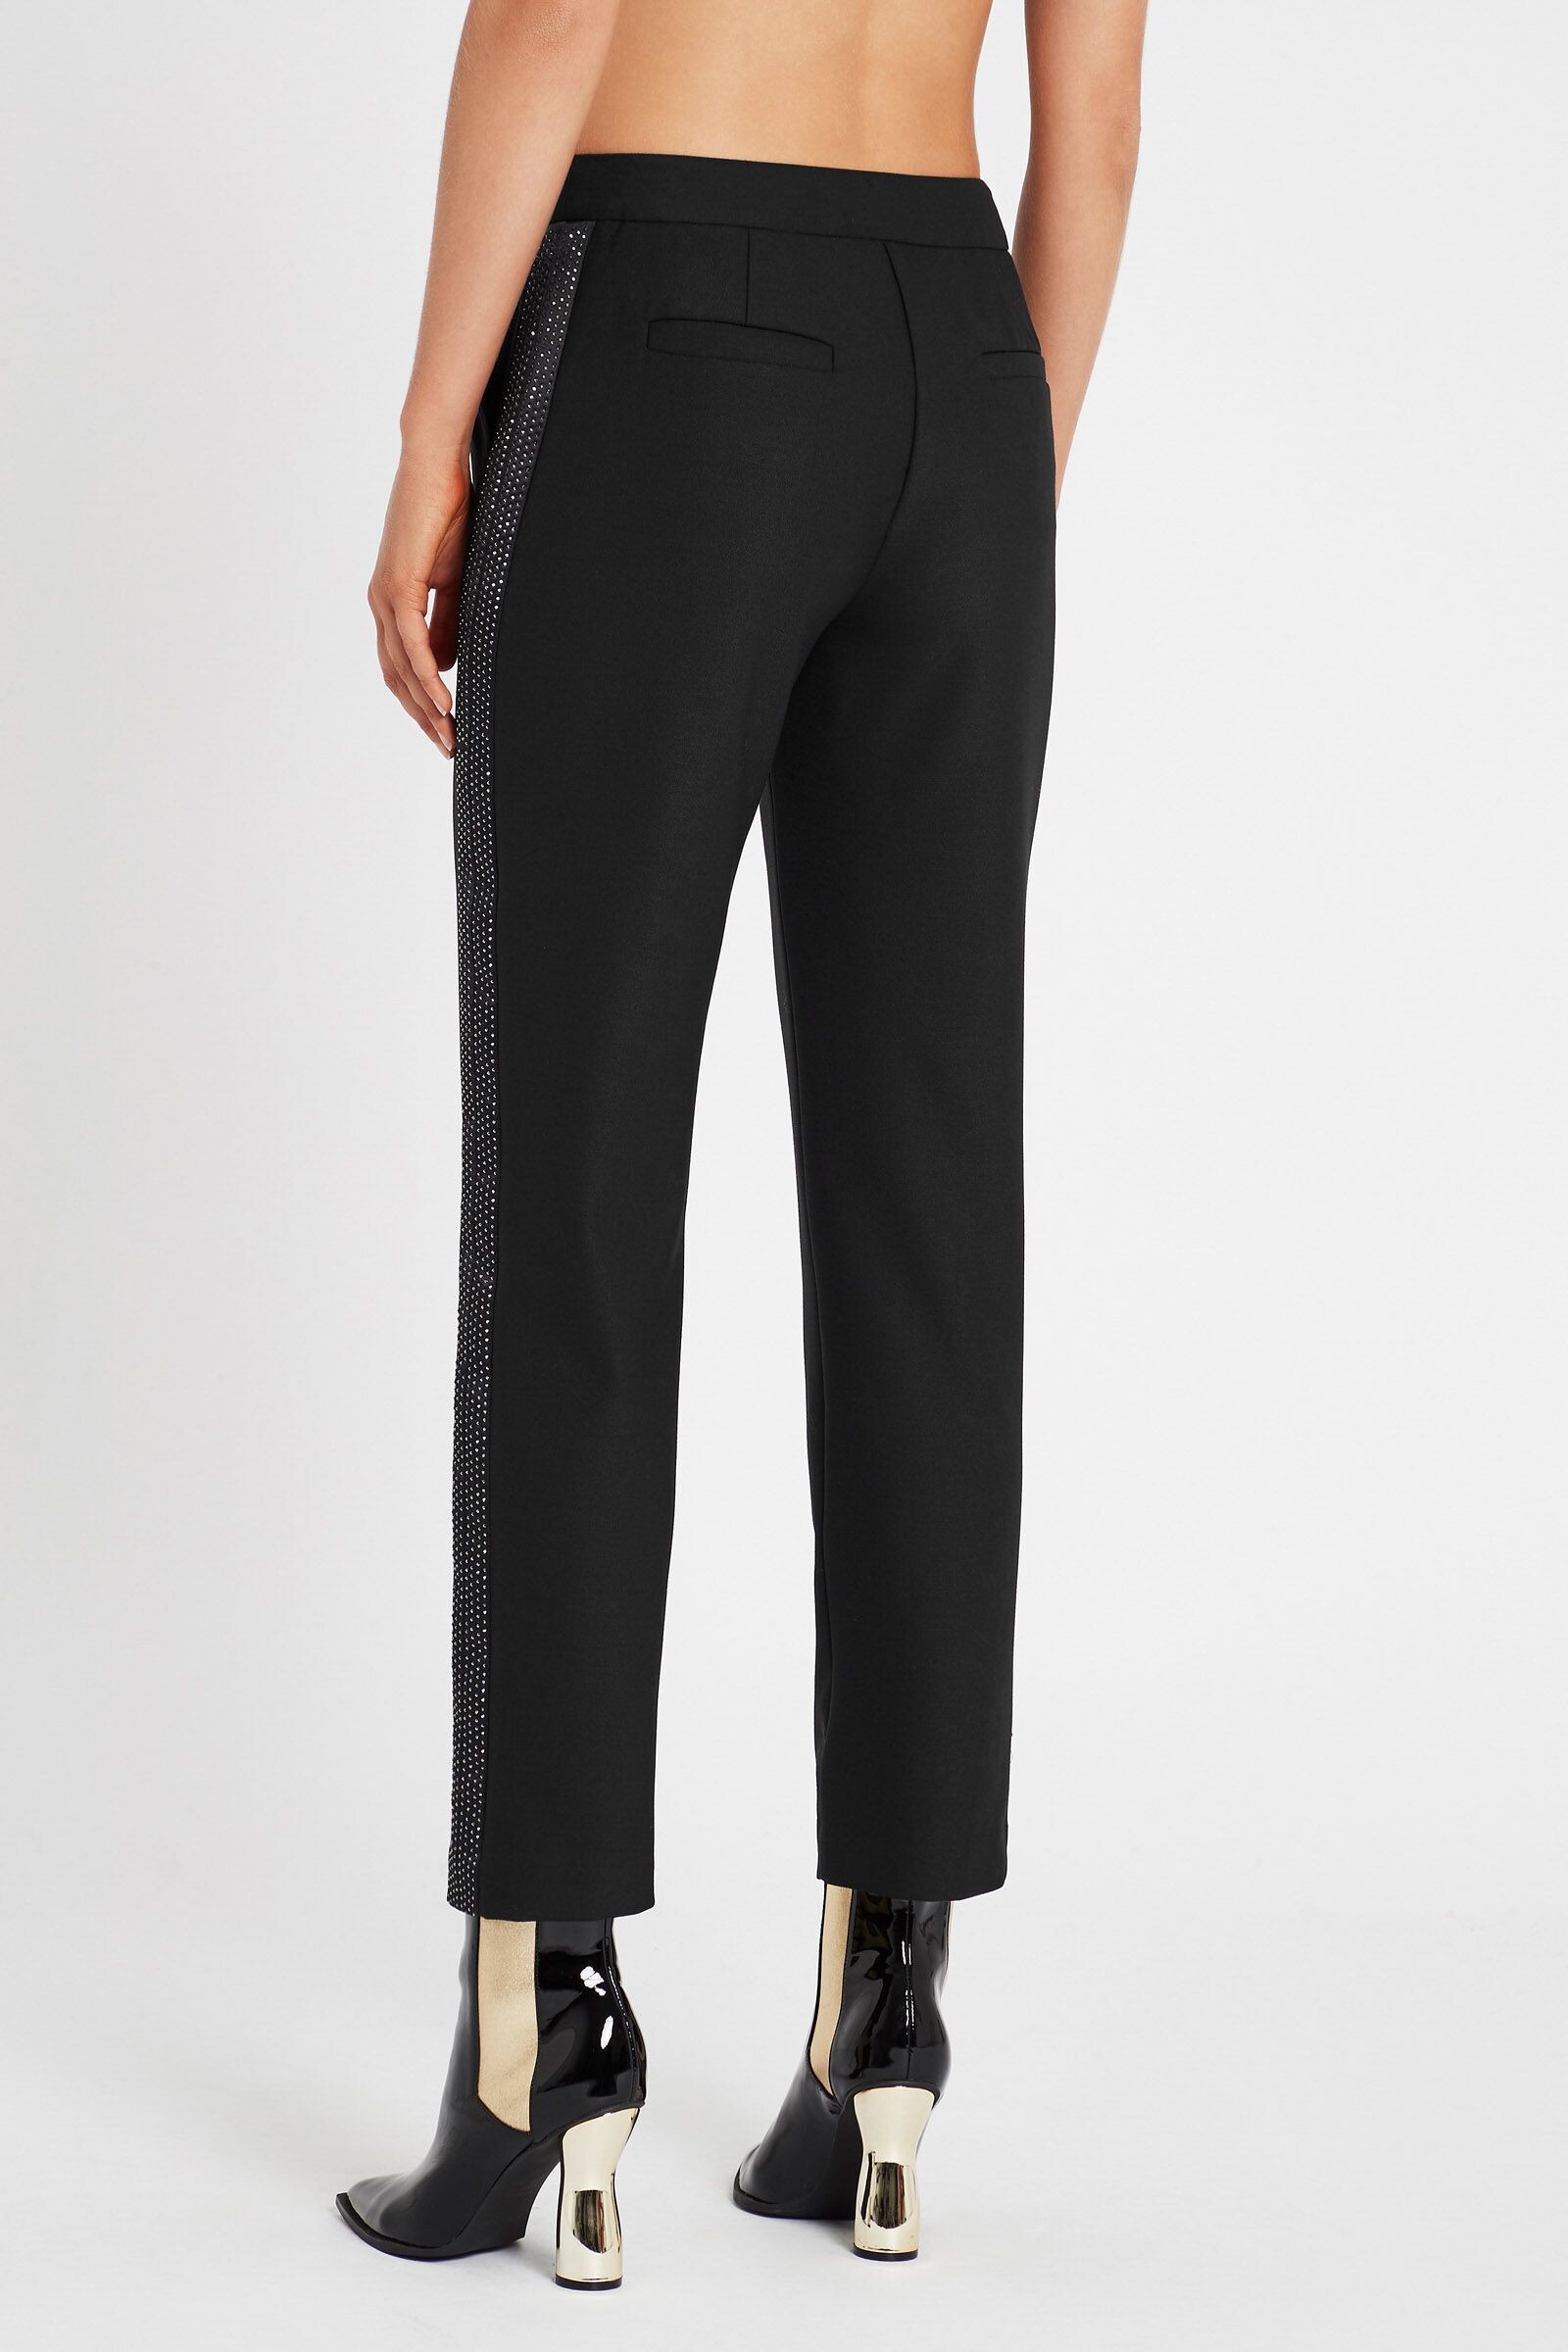 Dream Factory Pants Sass And Bide W19 Boxing Day Sale